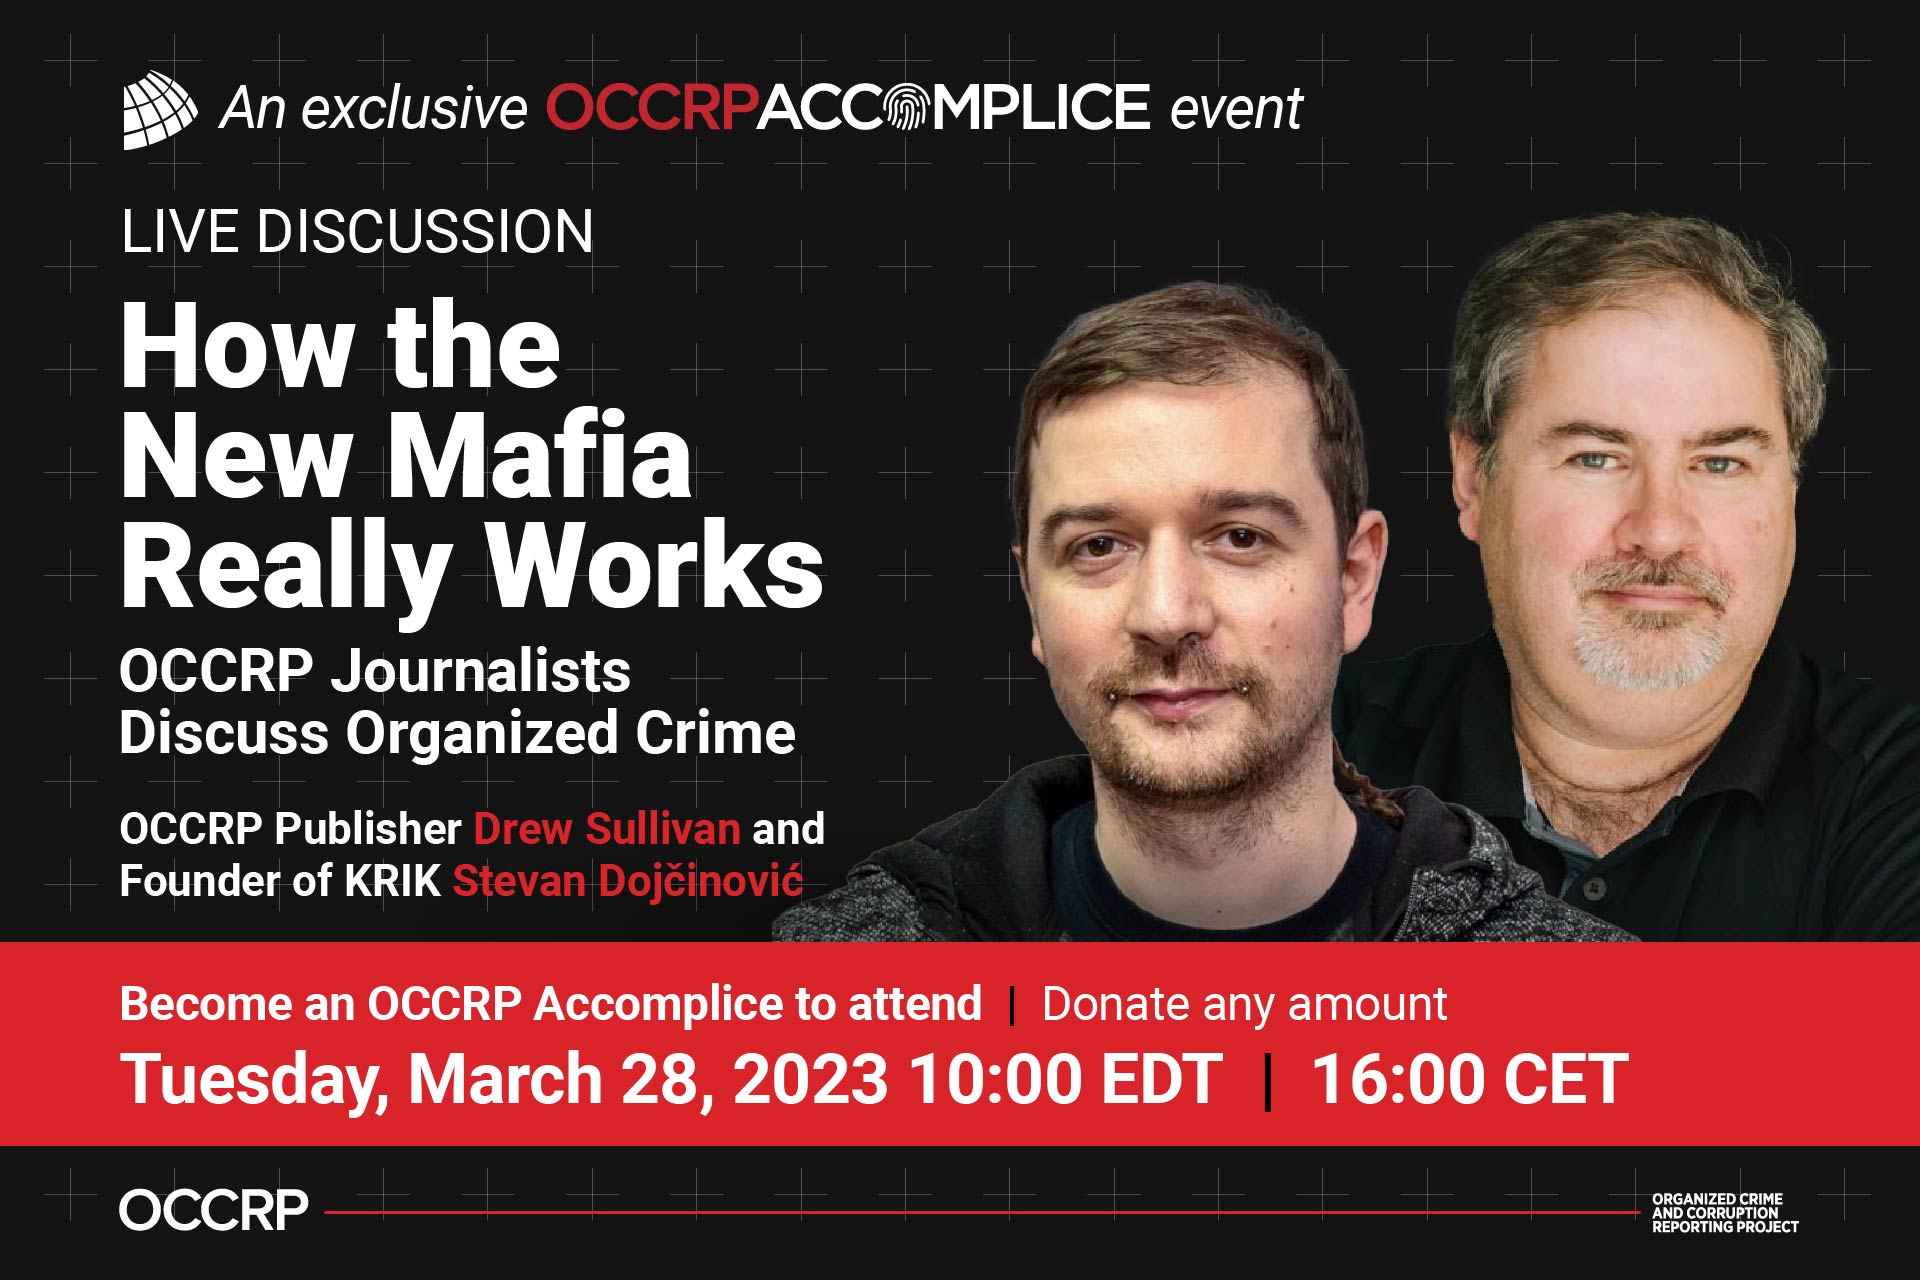 How the New Mafia Really Works: OCCRP Journalists Discuss Organized Crime